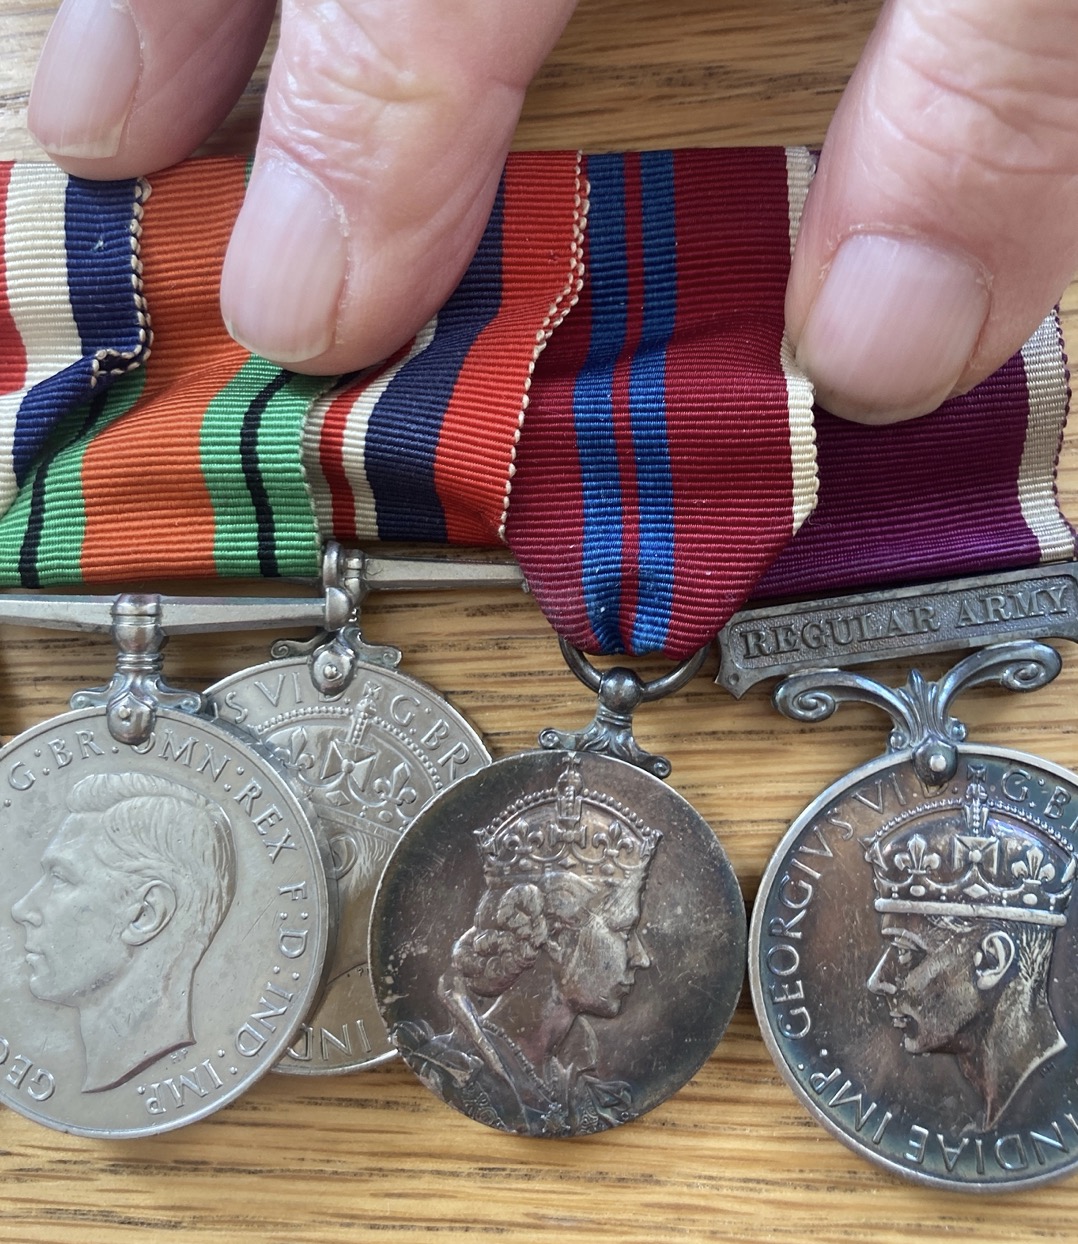 Mike’s father’s medals include The Queen’s Coronation medal